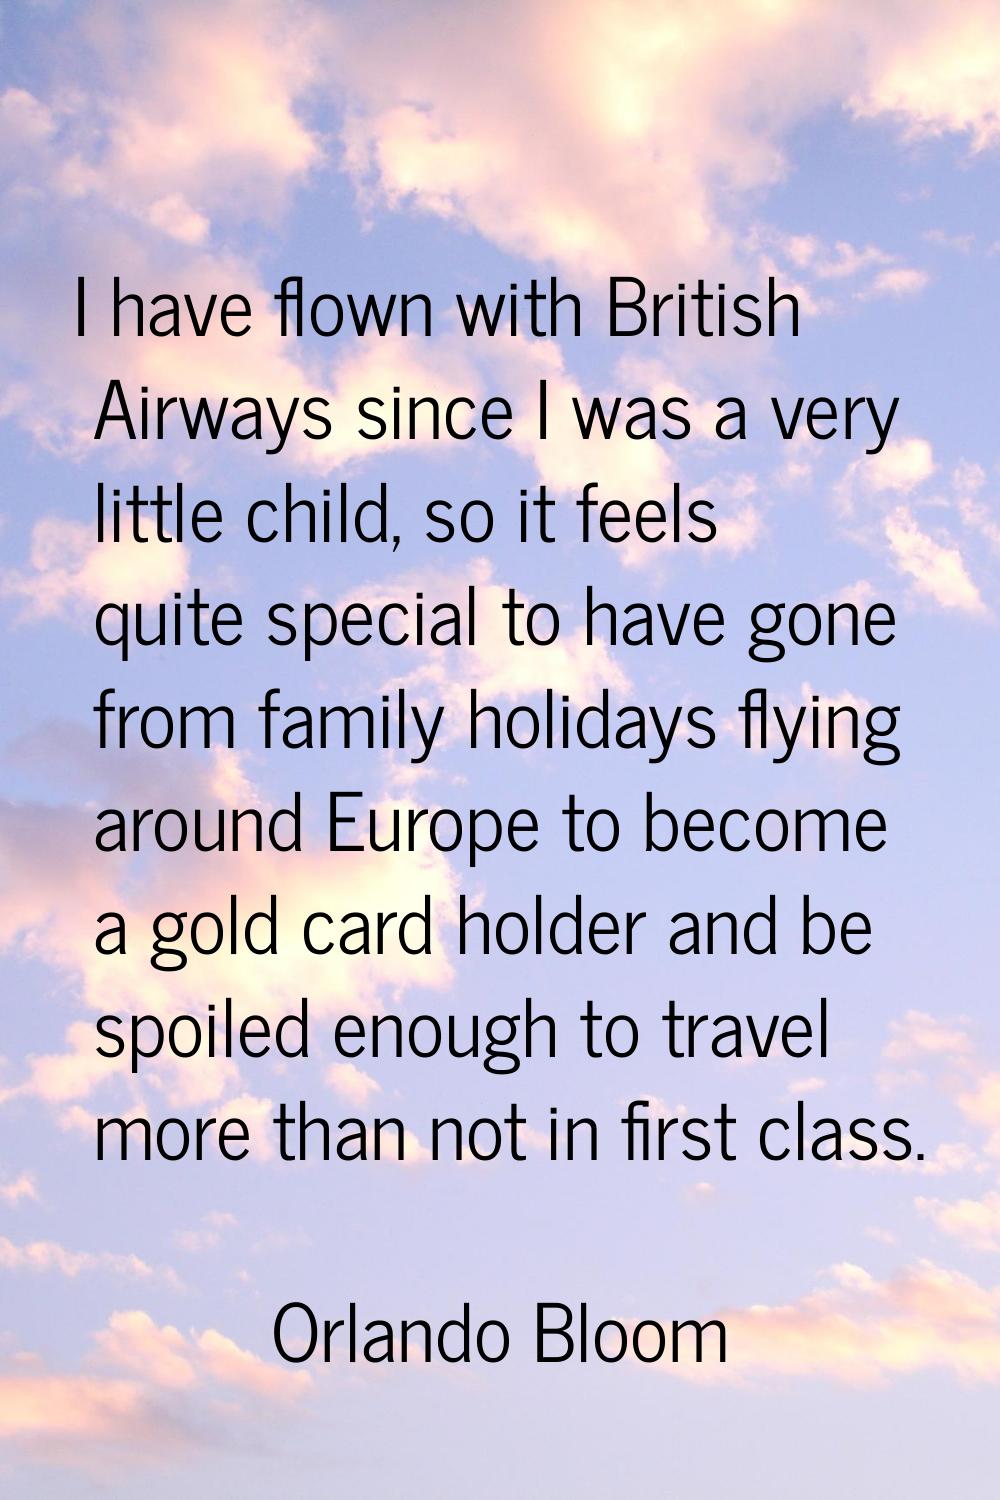 I have flown with British Airways since I was a very little child, so it feels quite special to hav